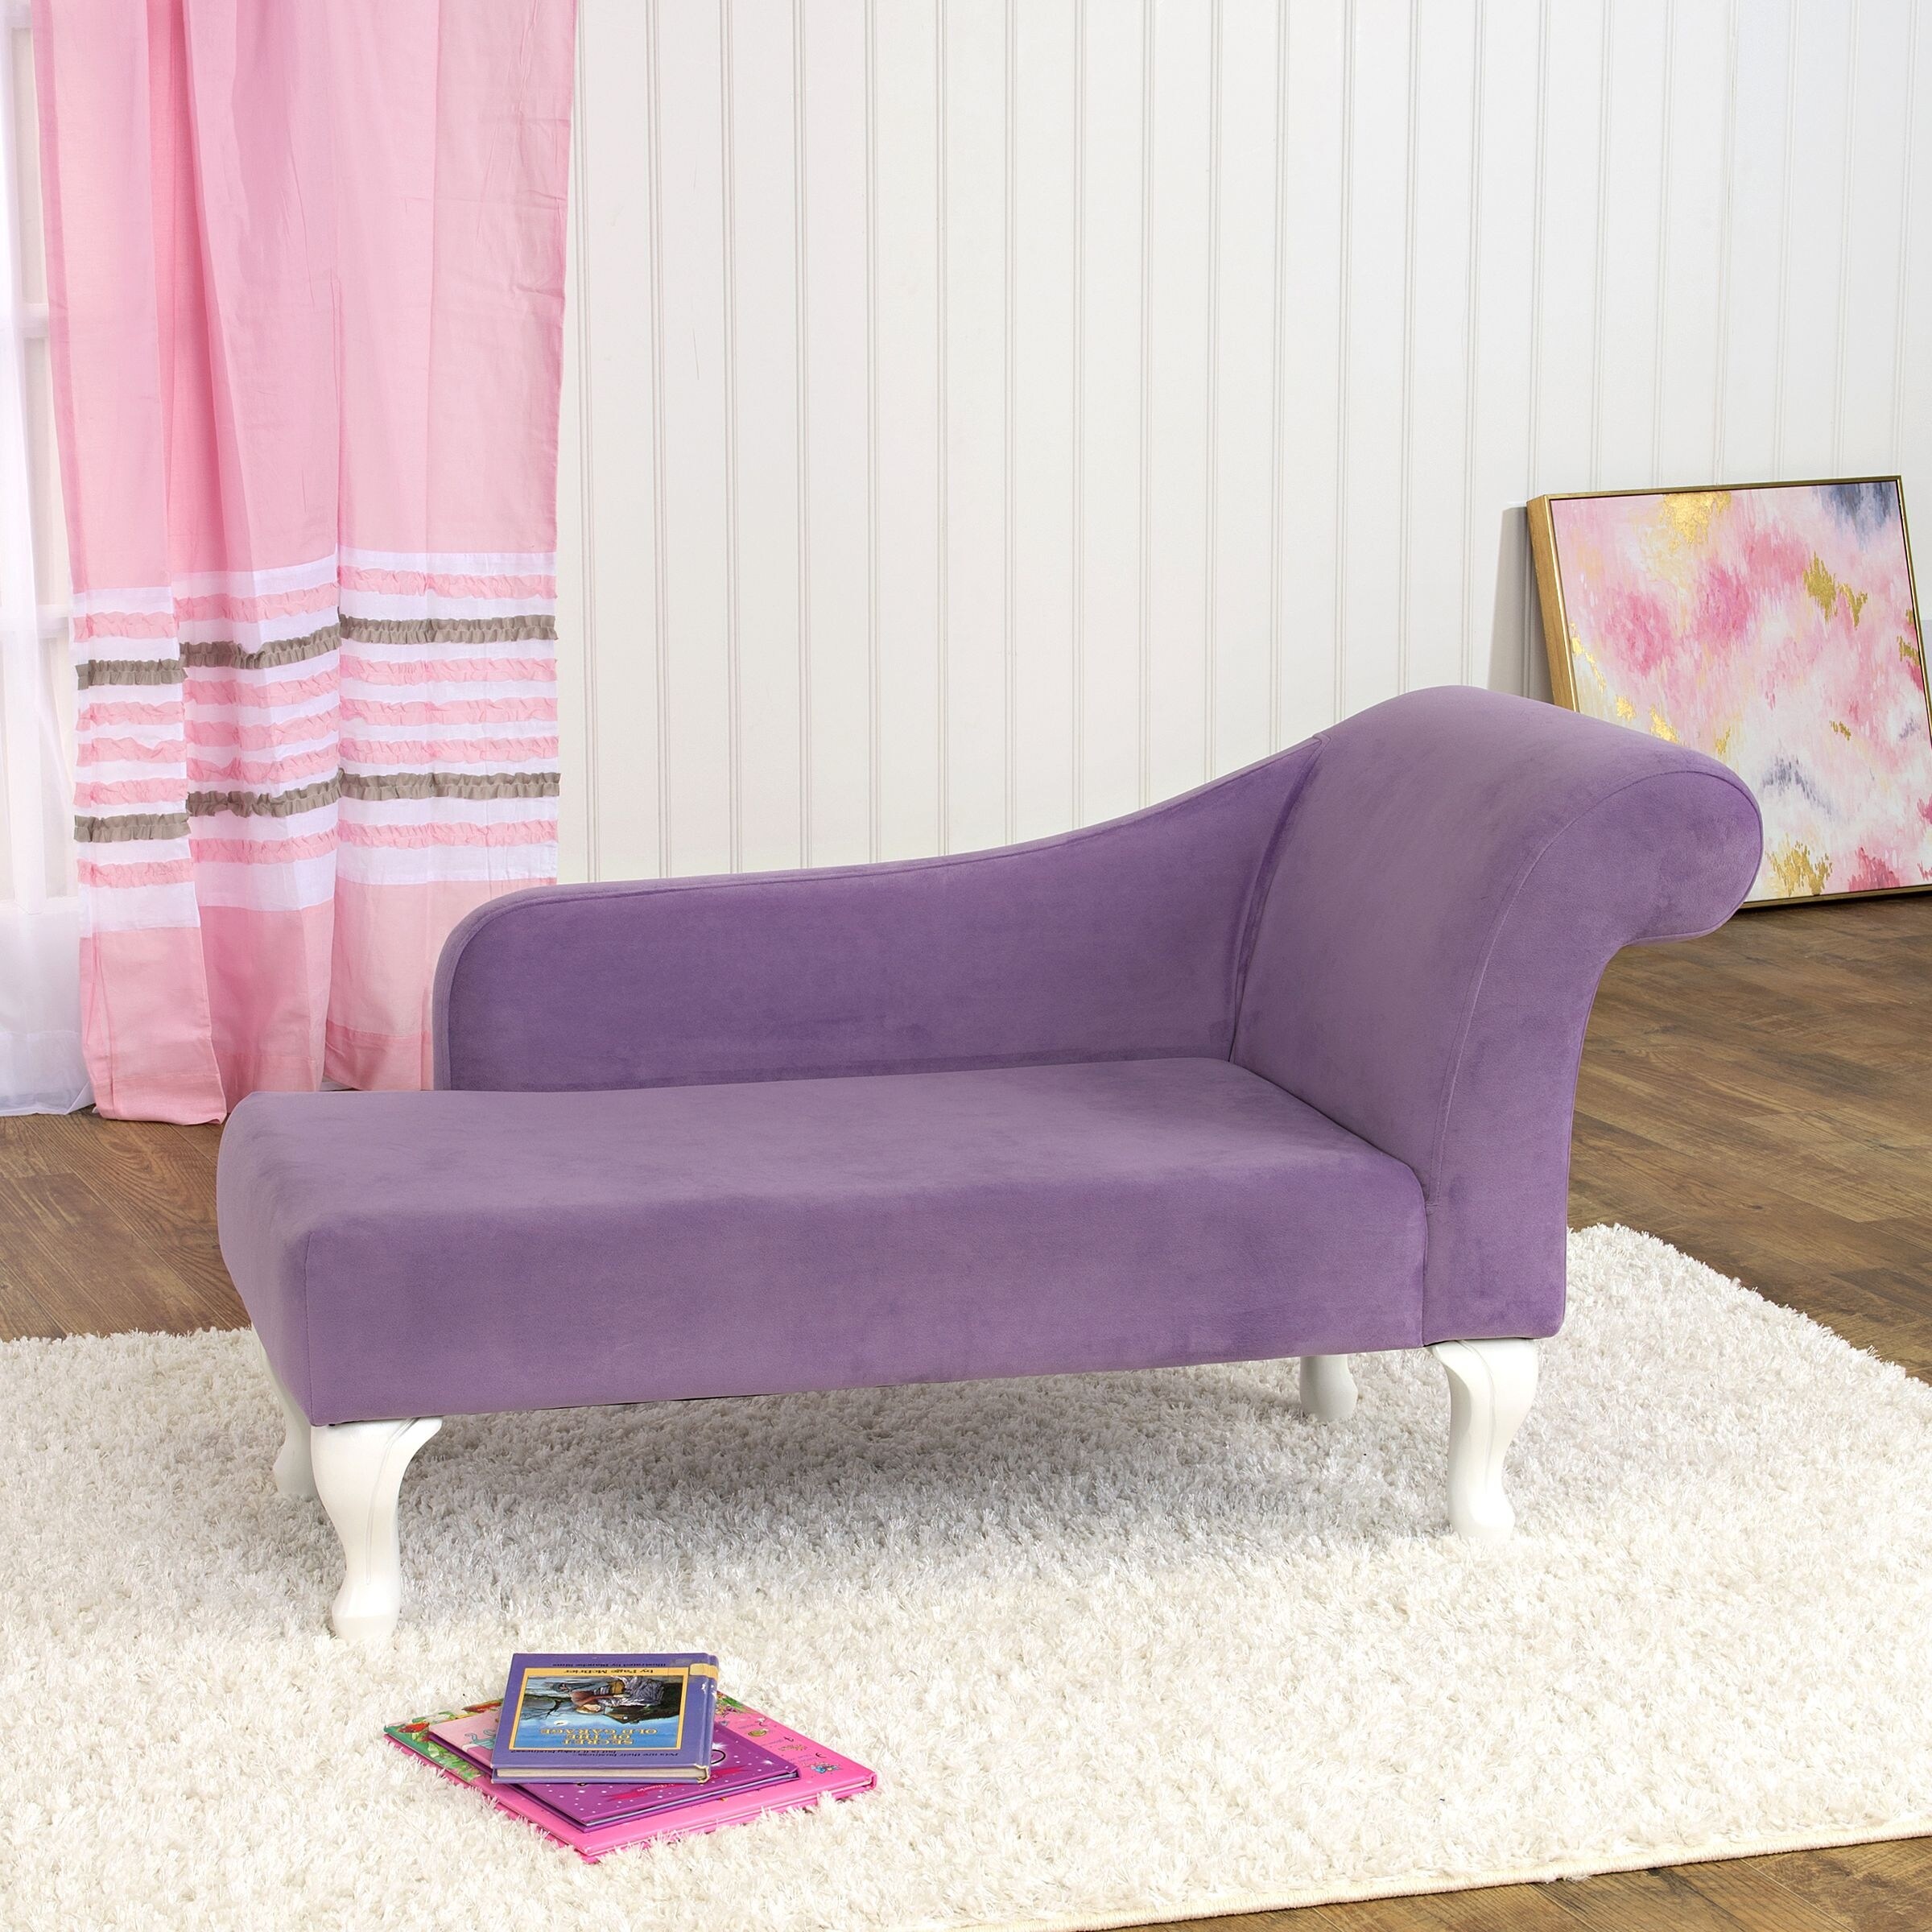 Bane Bungalow Hold op HomePop Diva Juvenile Accent Chair Lavender - Overstock - 12218448